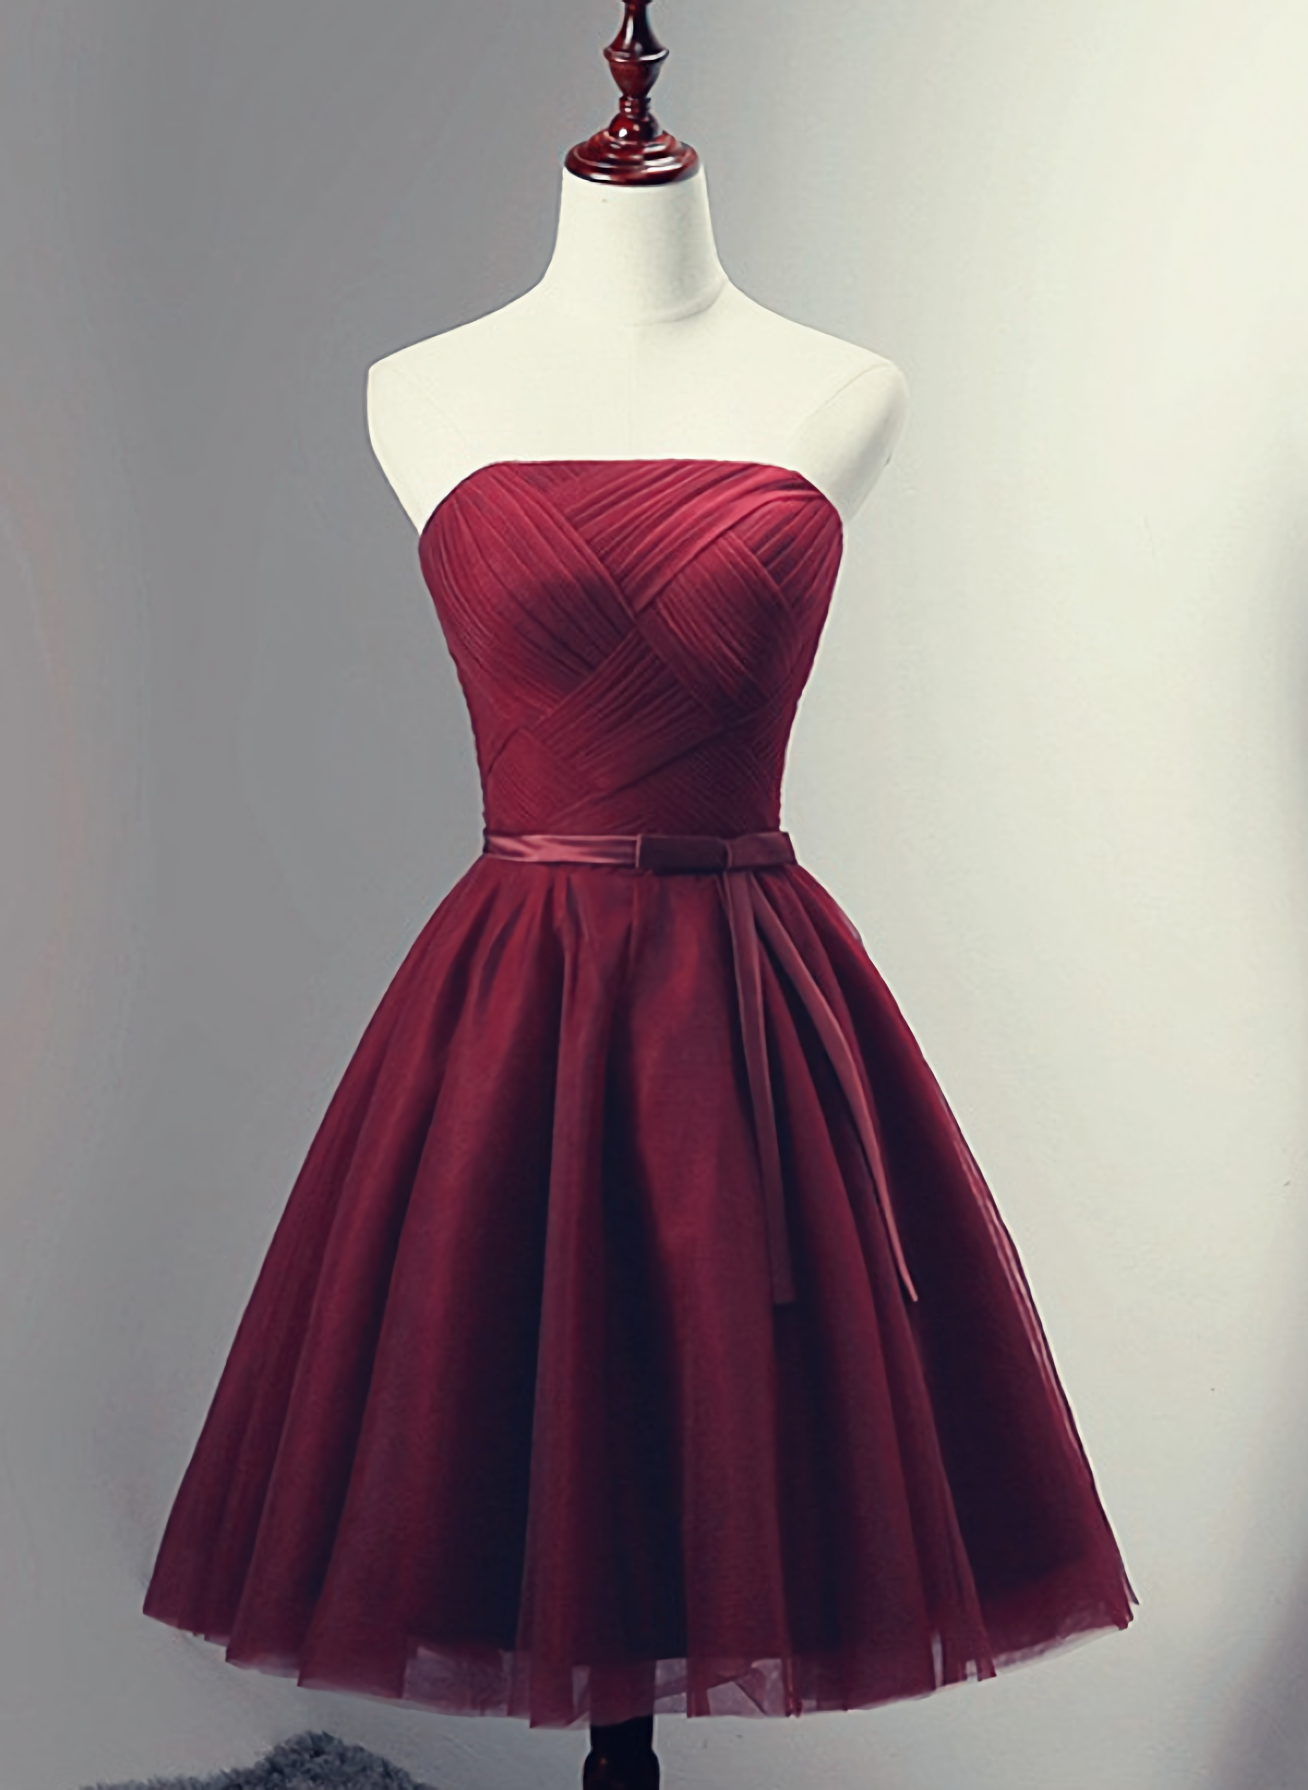 Homecoming Dresses Cute, Beautiful Burgundy Knee Length Lace Up Tulle Party Dress, Homecoming Dress, Short Prom Dress